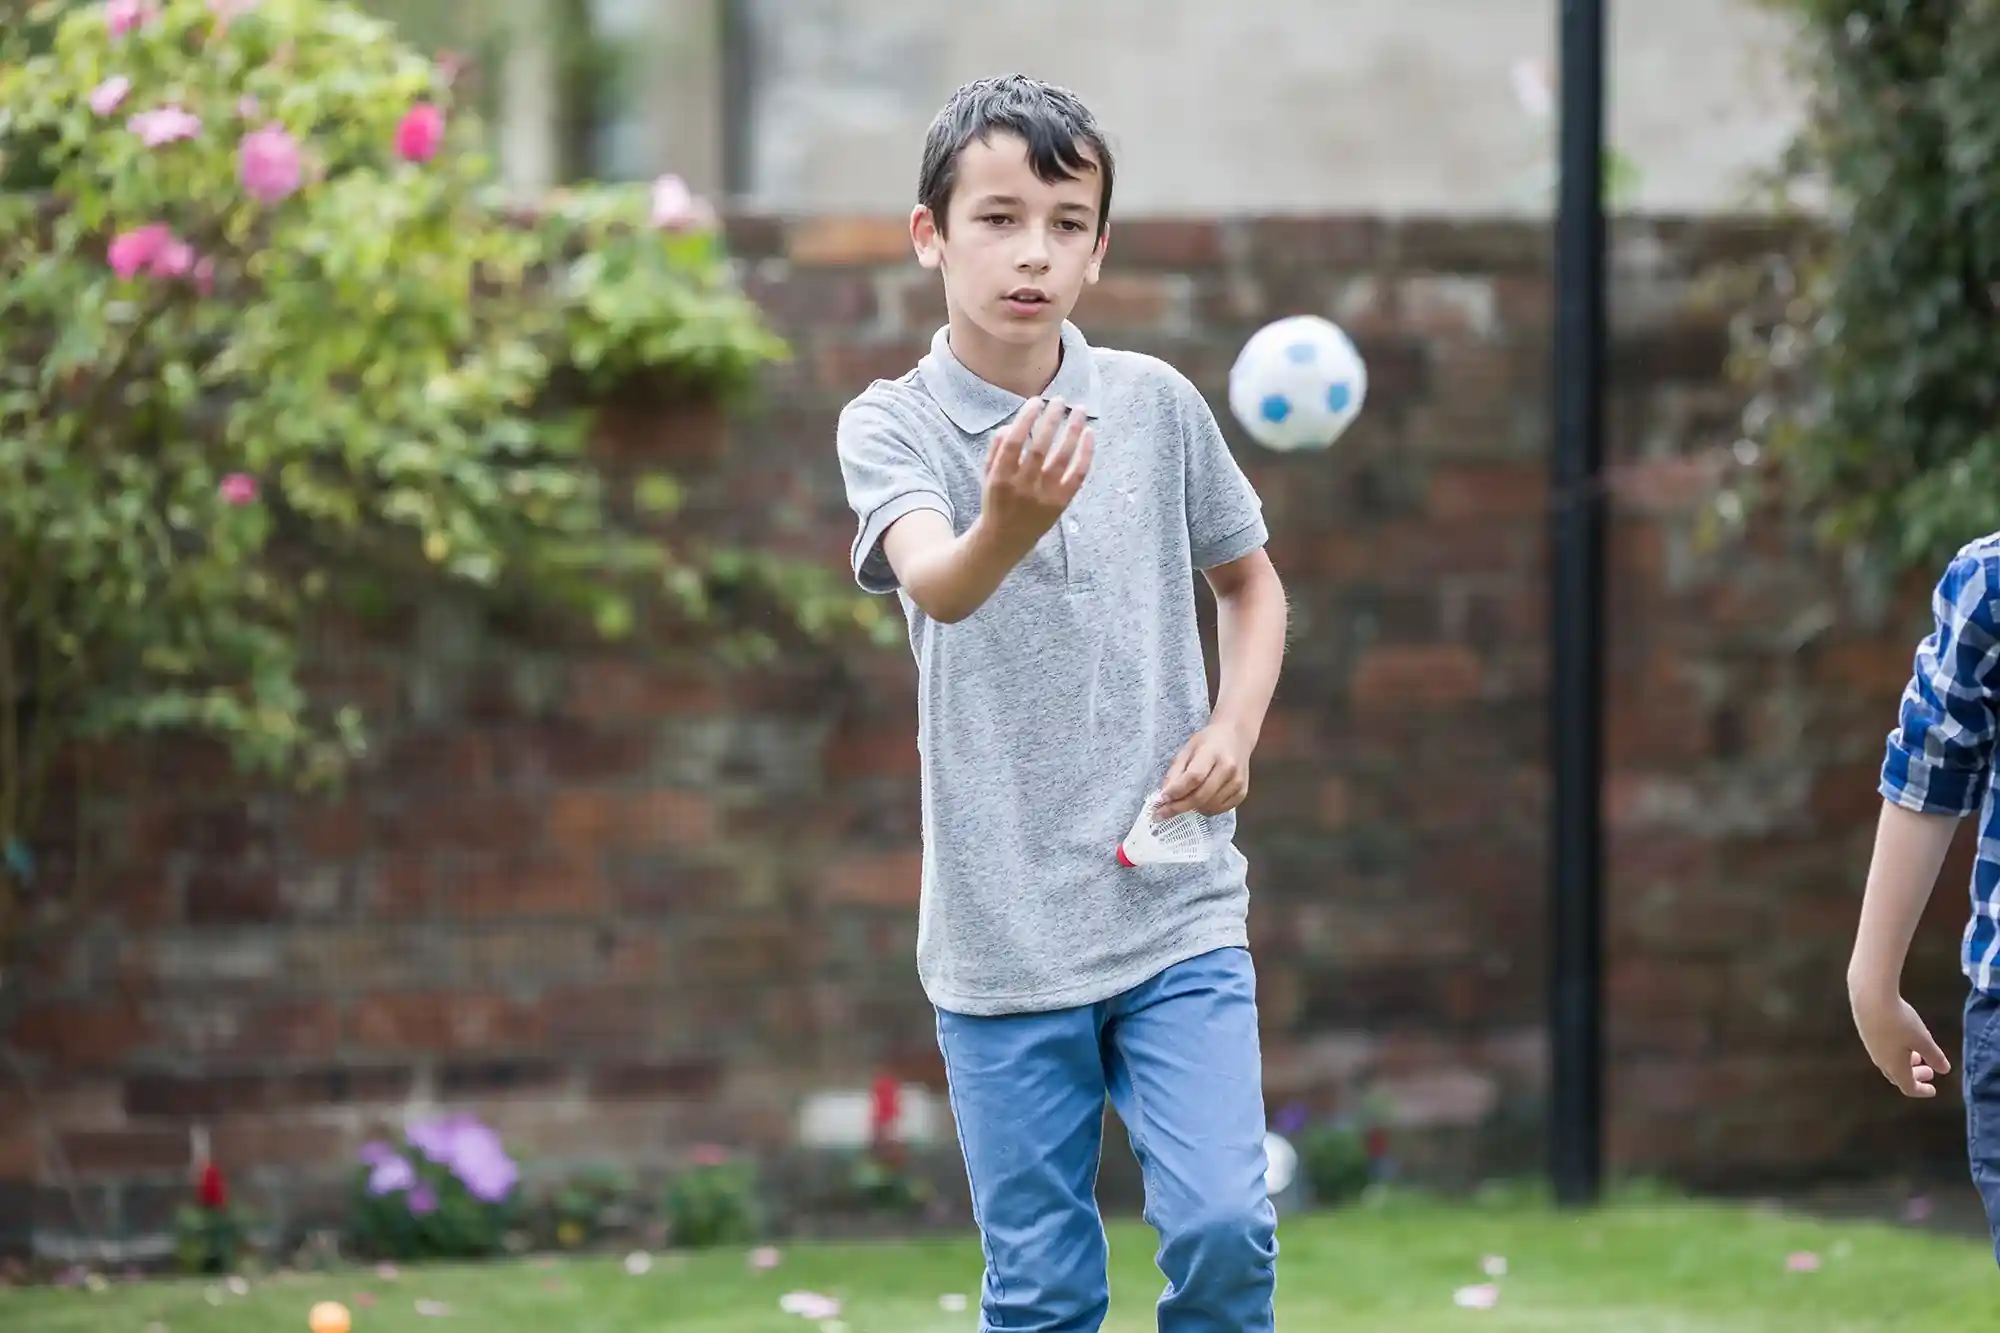 A boy in a gray polo shirt and blue pants catches a small soccer ball in a garden with green grass and a brick wall in the background.